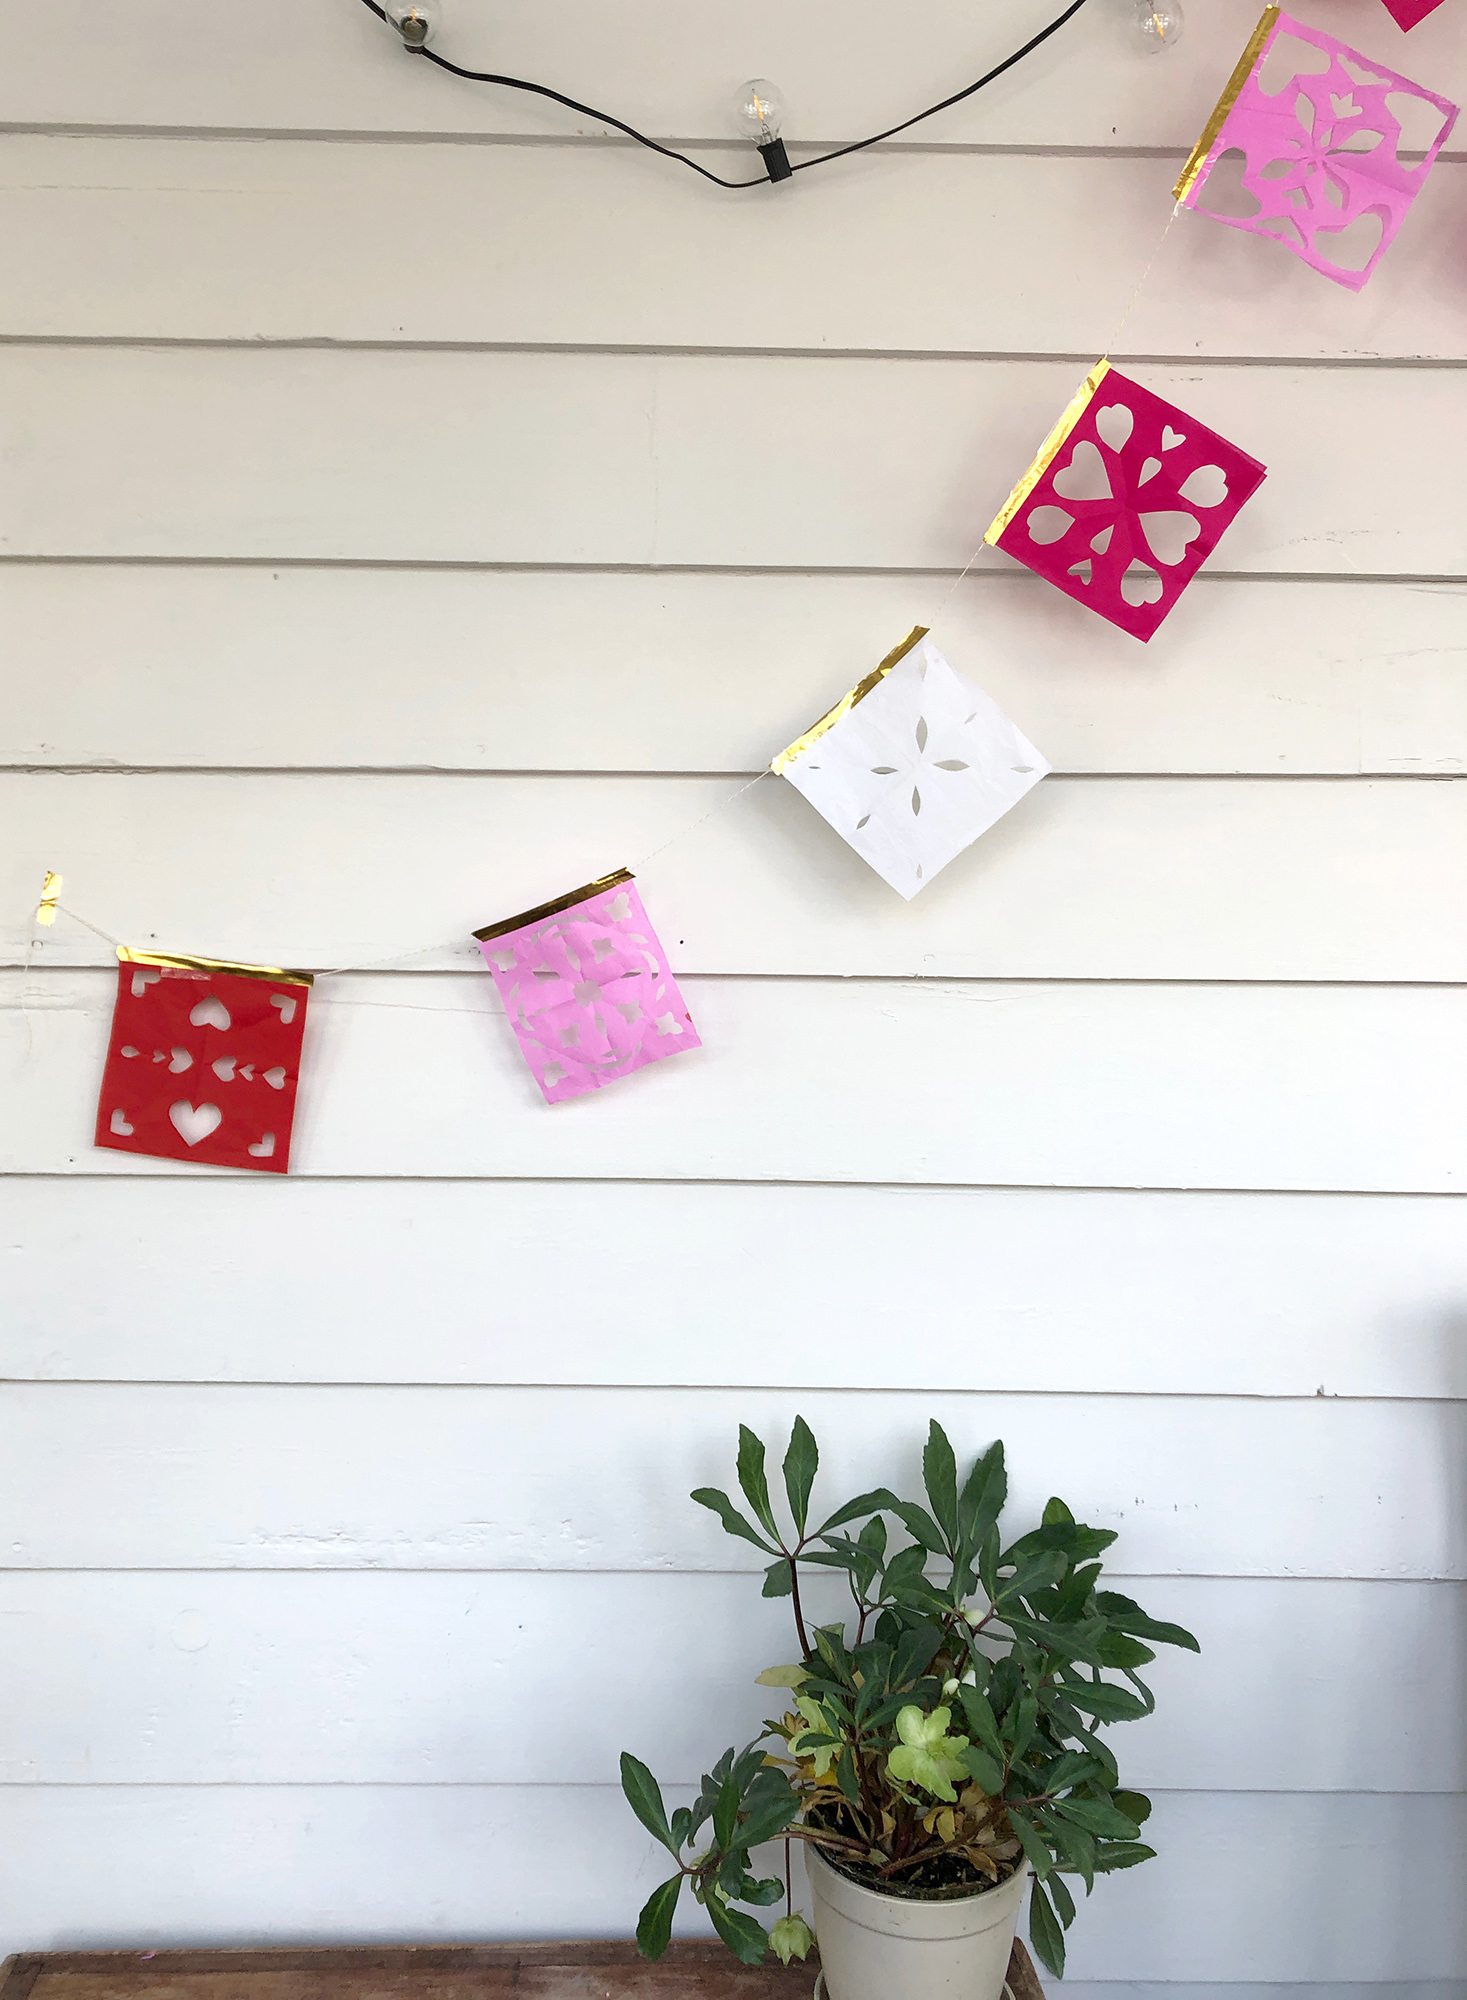 Papel picado for kids –hanging paper garland